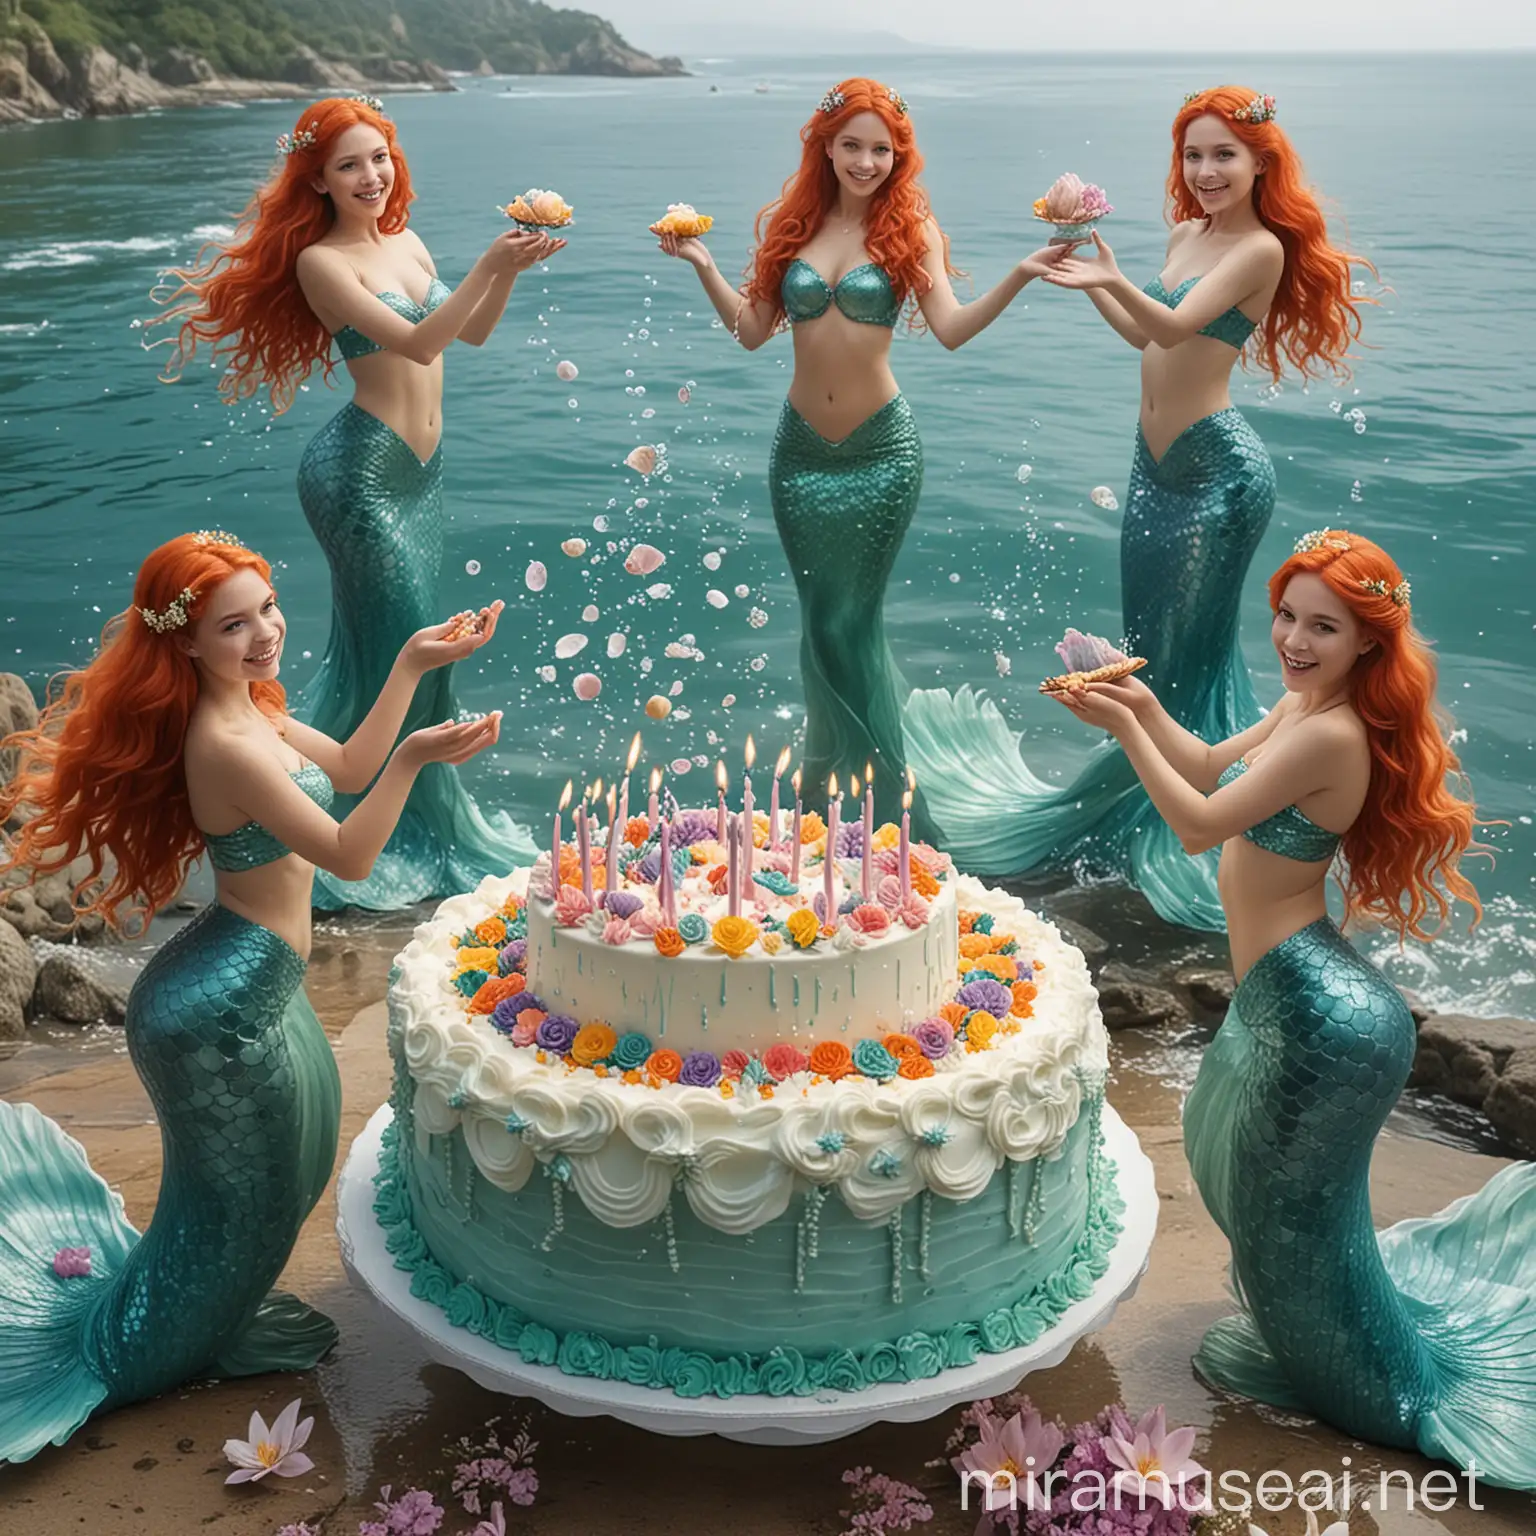 Mermaid Birthday Celebration Eight Mermaids Dancing with Cake and Bouquets